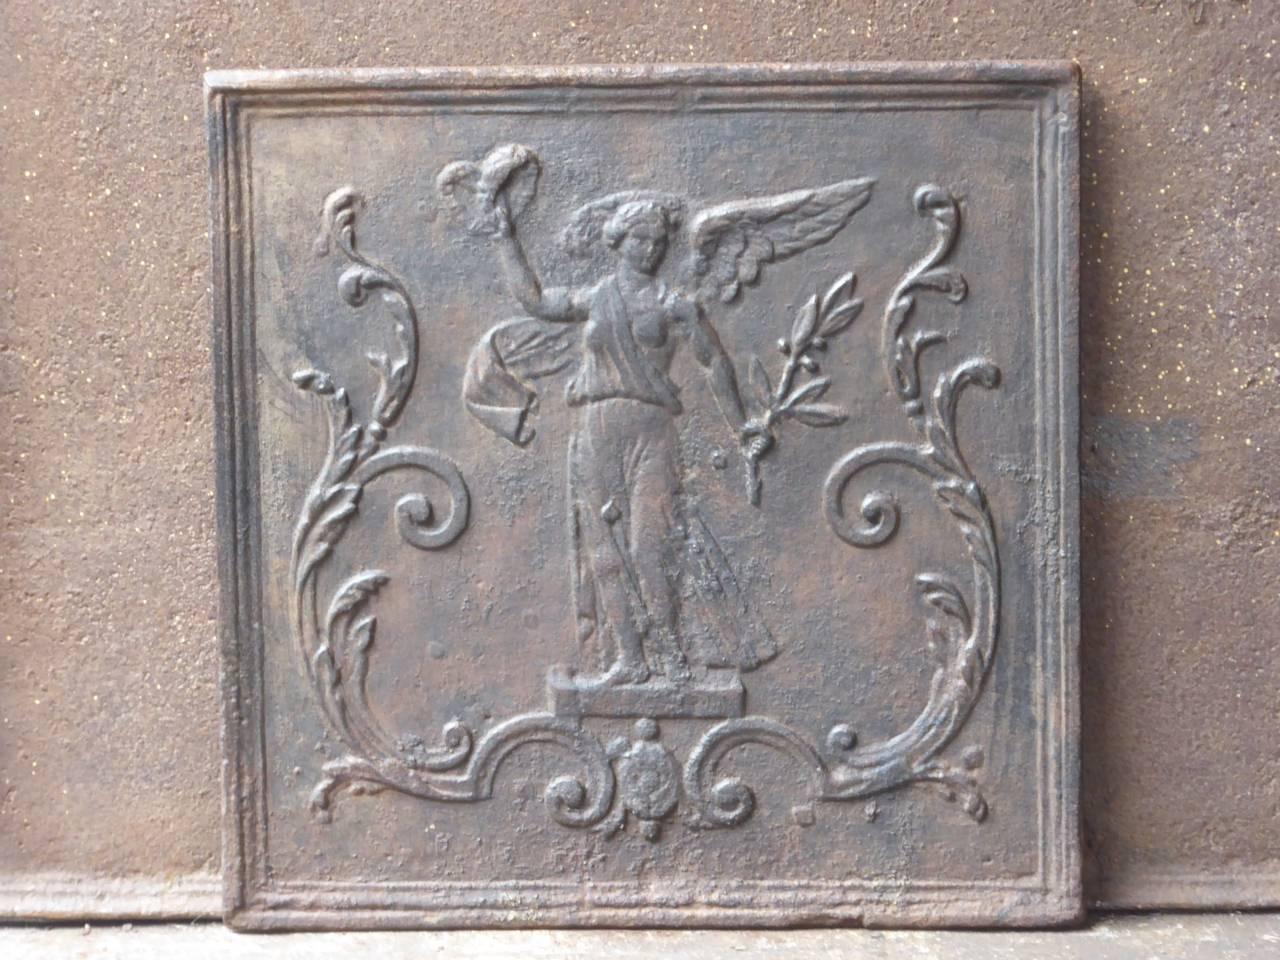 19th century French Napoleon III fireback with an allegory of Peace. The Allegory of Peace is holding an olive branche, symbol for peace and a laurel wreath, symbol for victory, in her hands.

We have a unique and specialized collection of antique